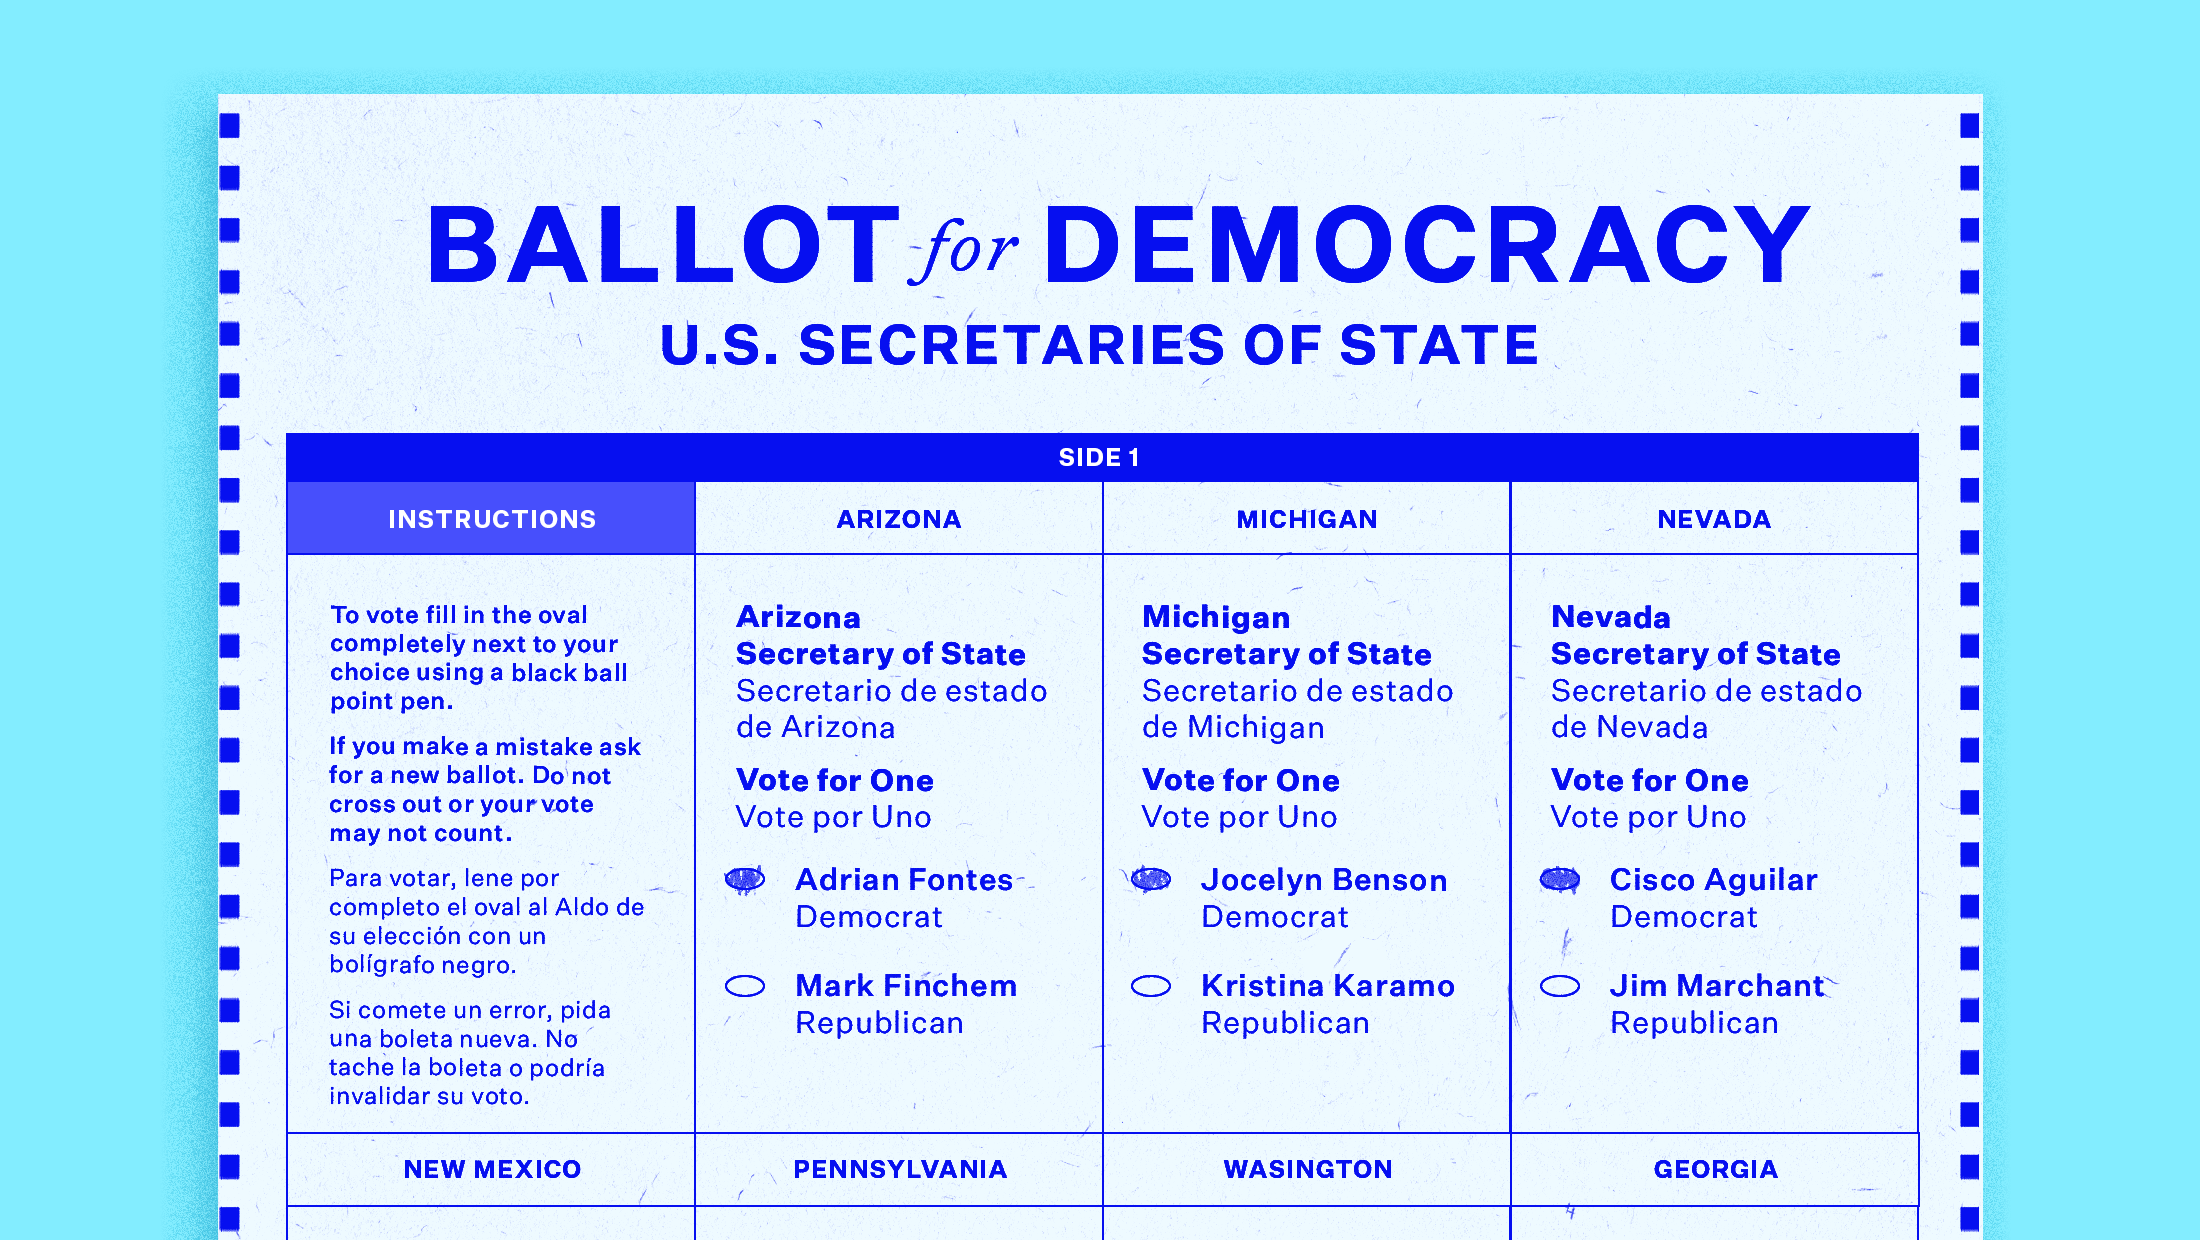 Light blue background with blue ballot that reads from the top "BALLOT FOR DEMOCRACY U.S. SECRETARIES OF STATE" and rectangles for each secretary of state race in each state including (from left to right) Arizona with Adrian Fontes and Mark Finchem, Michigan with Jocelyn Benson and Kristina Karamo, Nevada with Cisco Aguilar and Jim Marchant, New Mexico, Pennsylvania, Washington and Georgia.